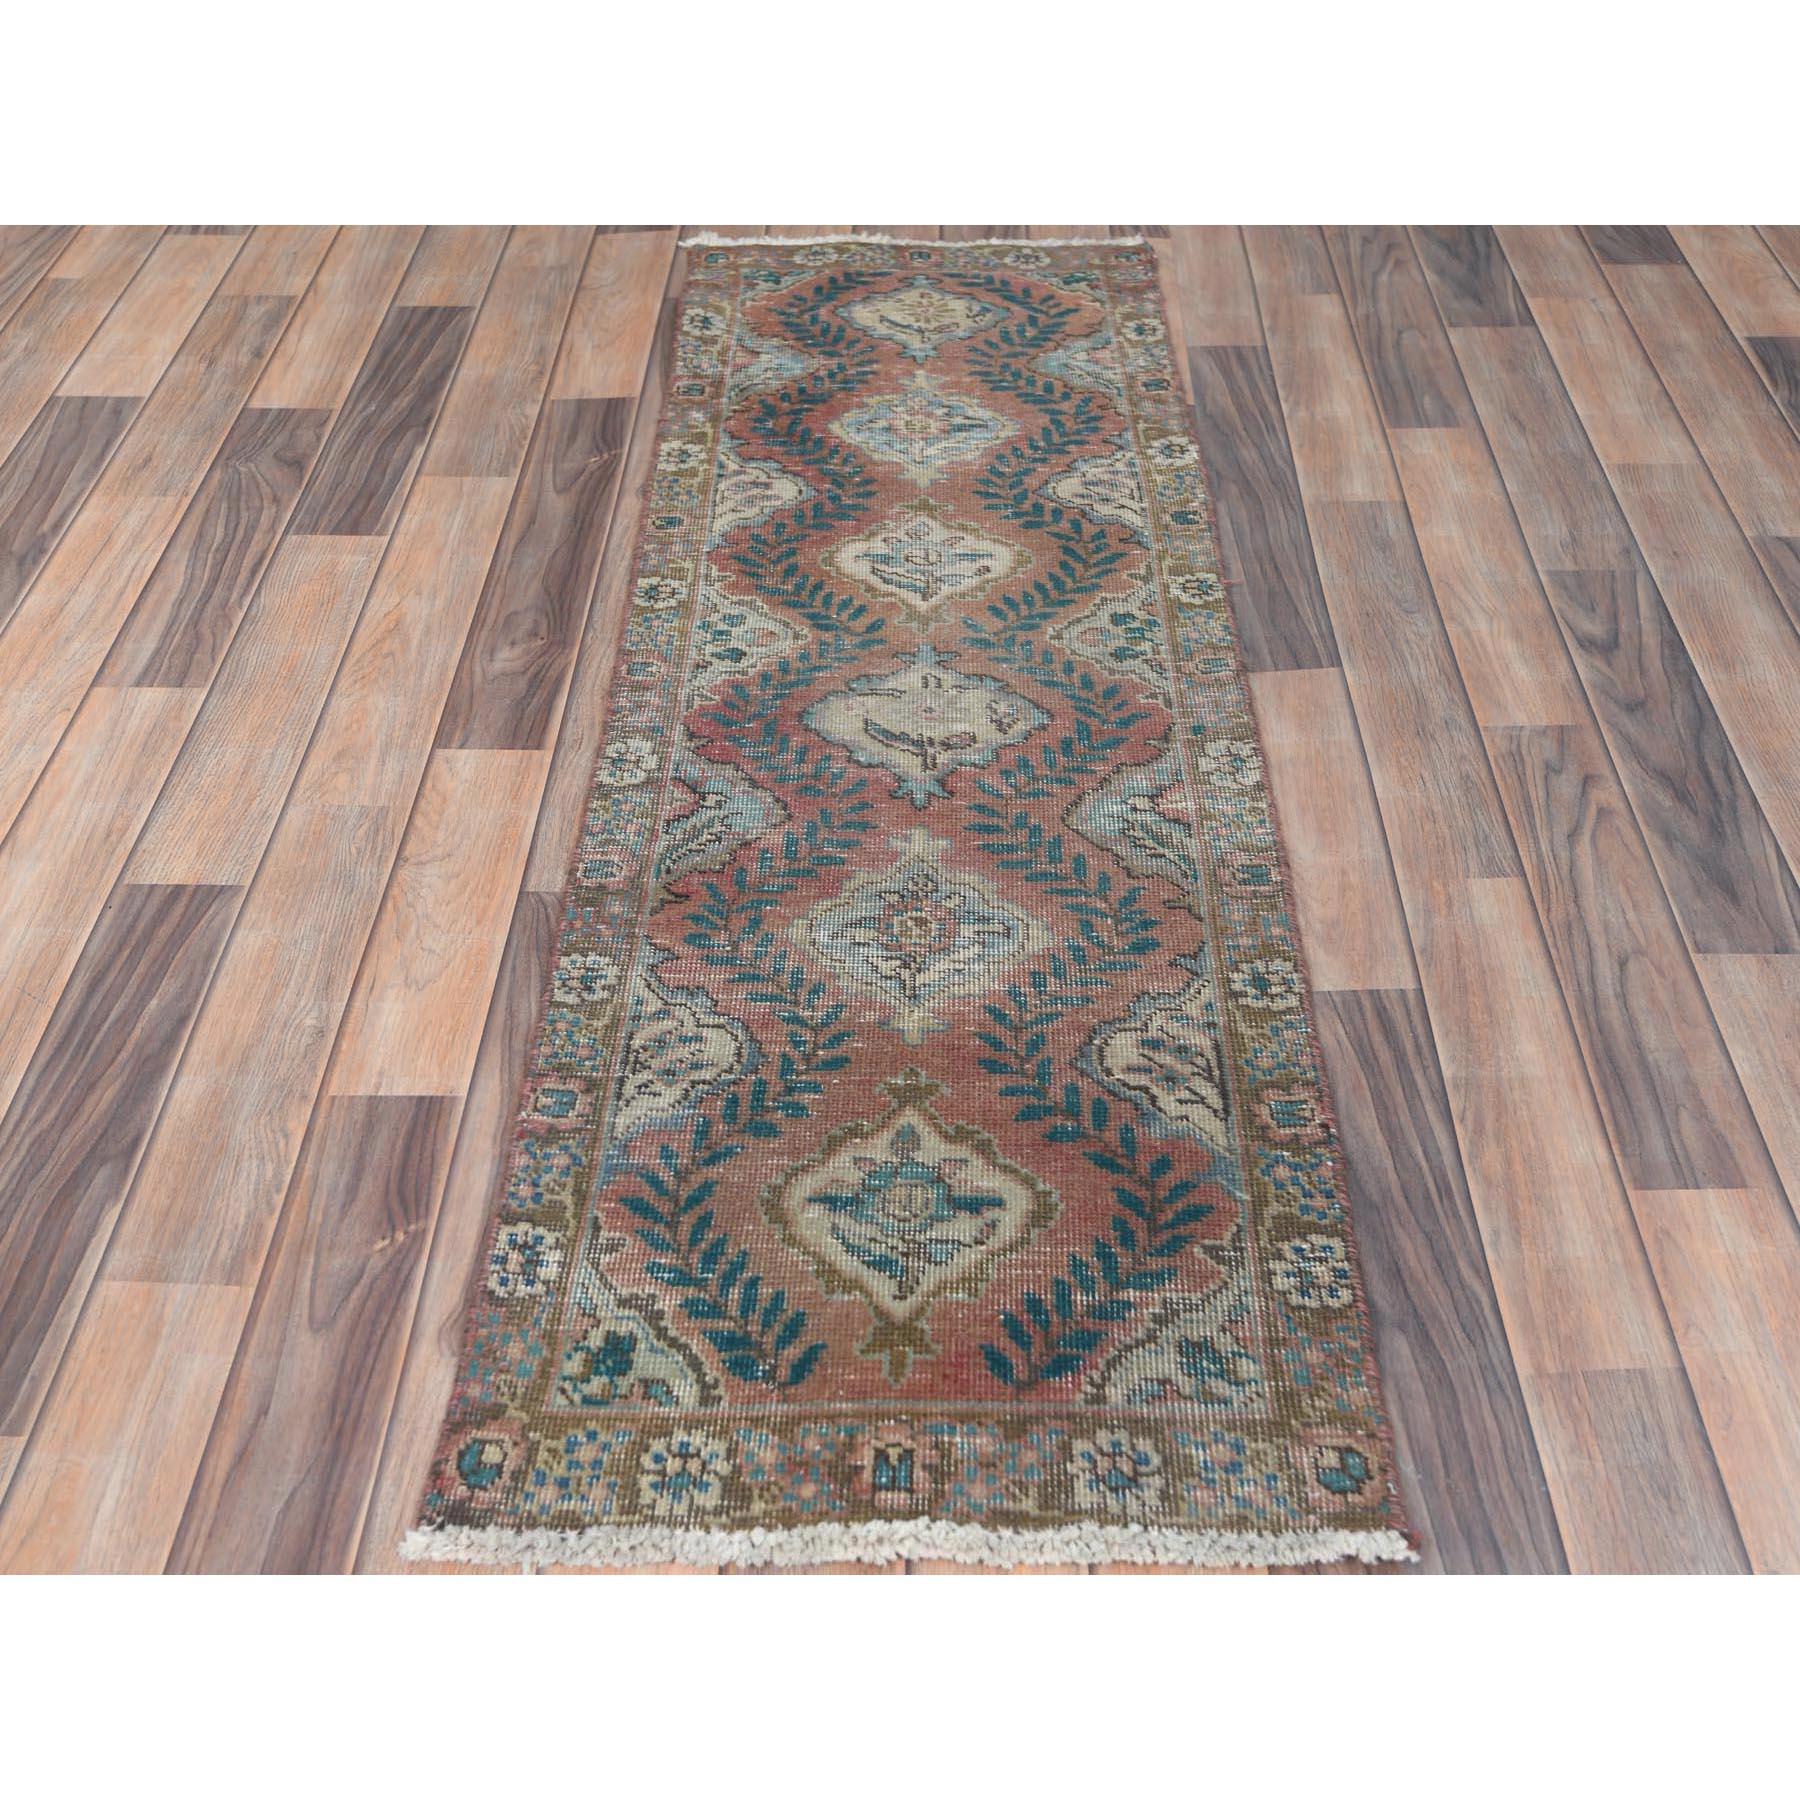 This fabulous Hand-Knotted carpet has been created and designed for extra strength and durability. This rug has been handcrafted for weeks in the traditional method that is used to make
Exact Rug Size in Feet and Inches : 1'8